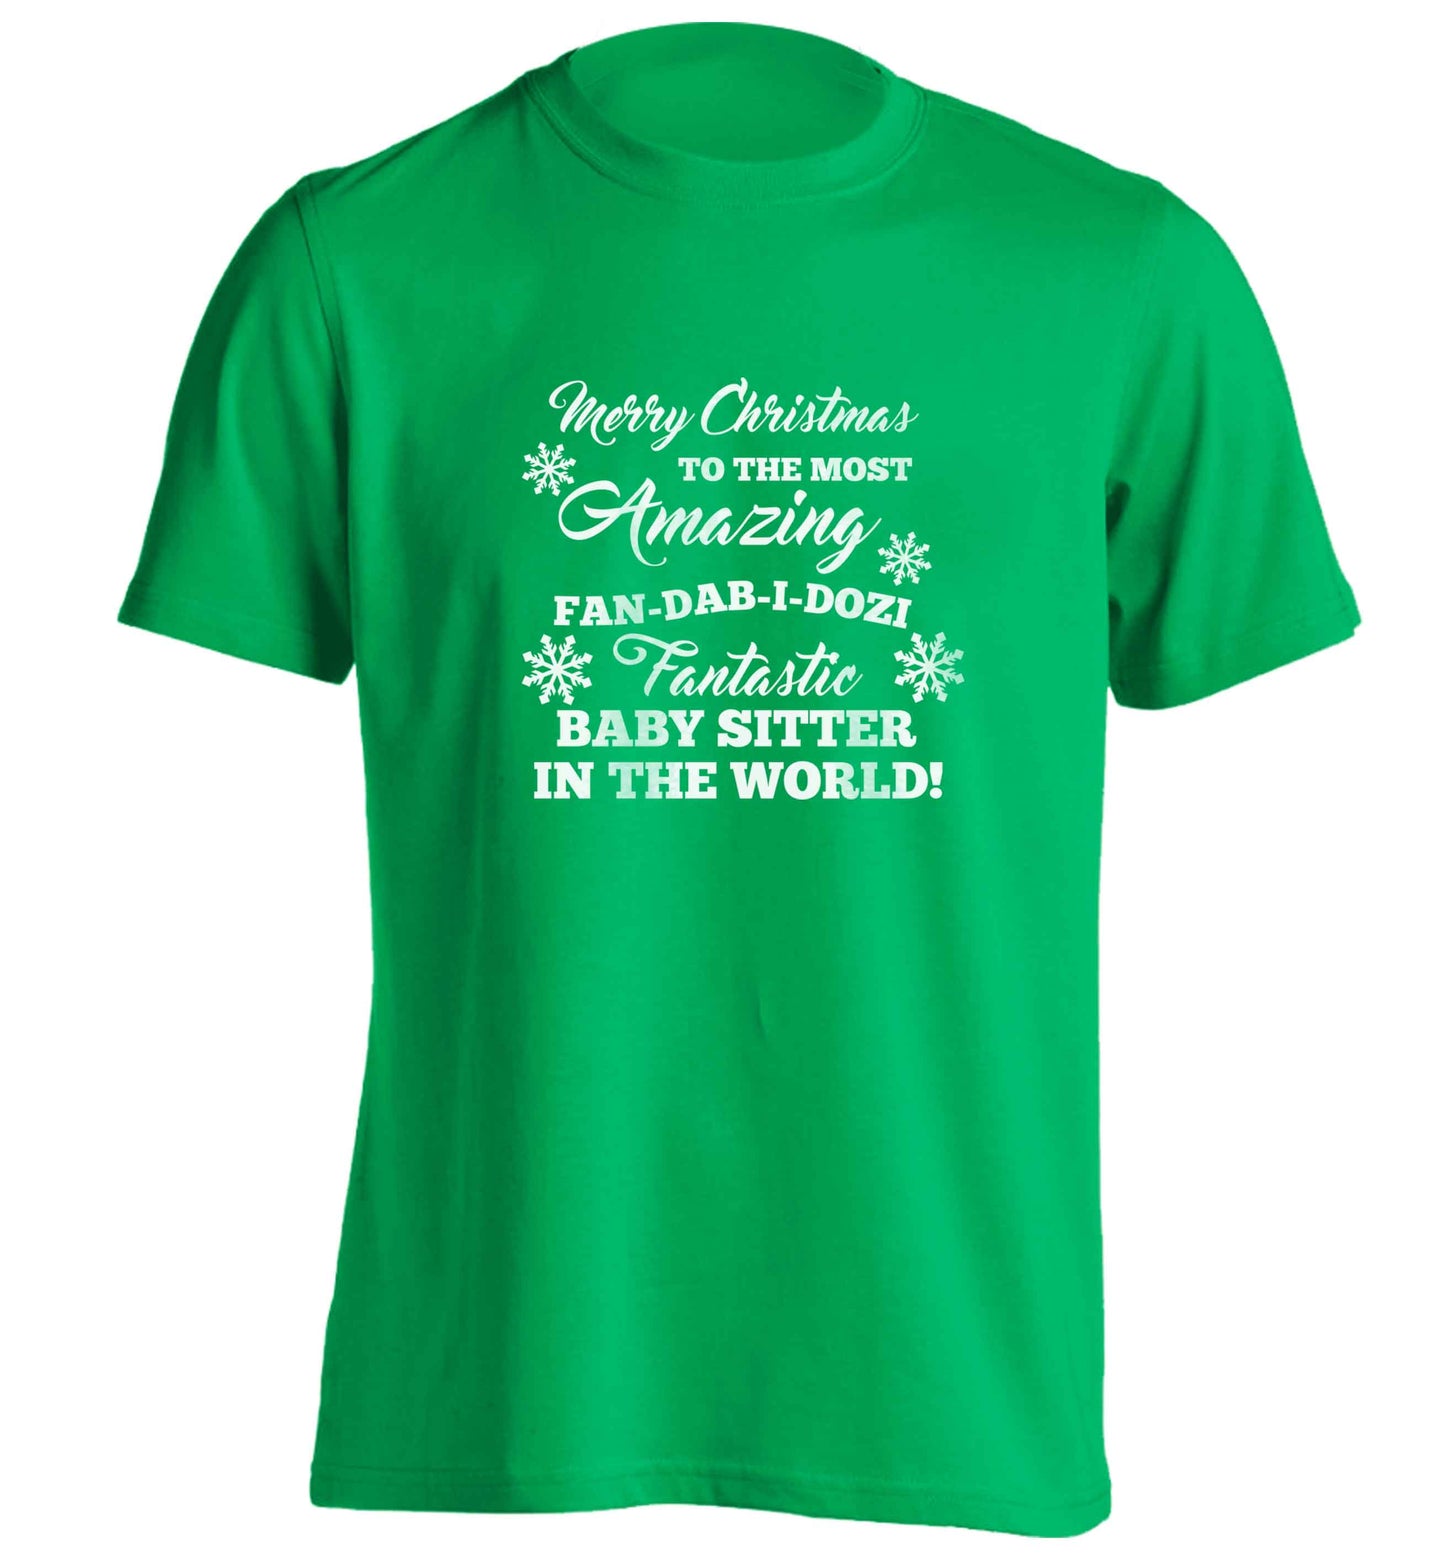 Merry Christmas to the most amazing fan-dab-i-dozi fantasic baby sitter in the world adults unisex green Tshirt 2XL